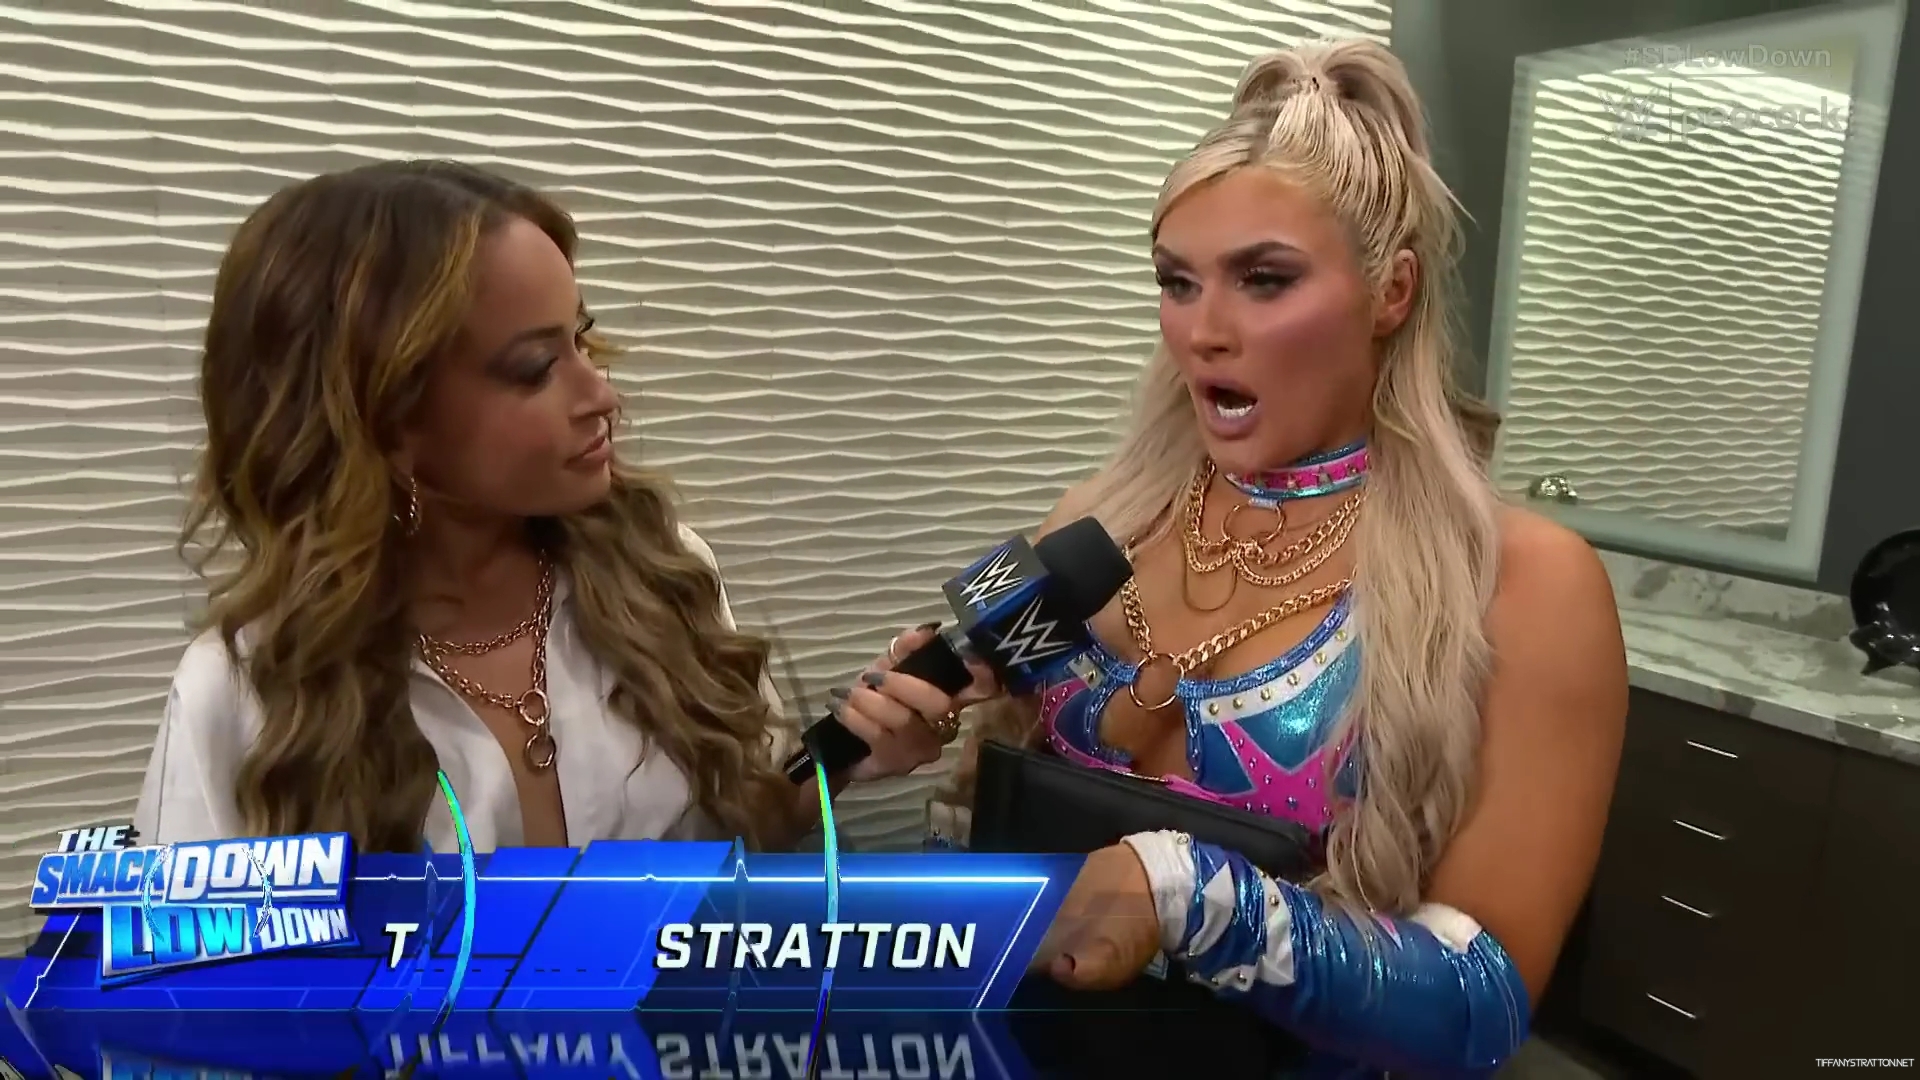 x2mate_com-Tiffany_Stratton_is_officially_on_SmackDown__SmackDown_LowDown__Feb__22C_2023-281080p29_mp40025.jpg